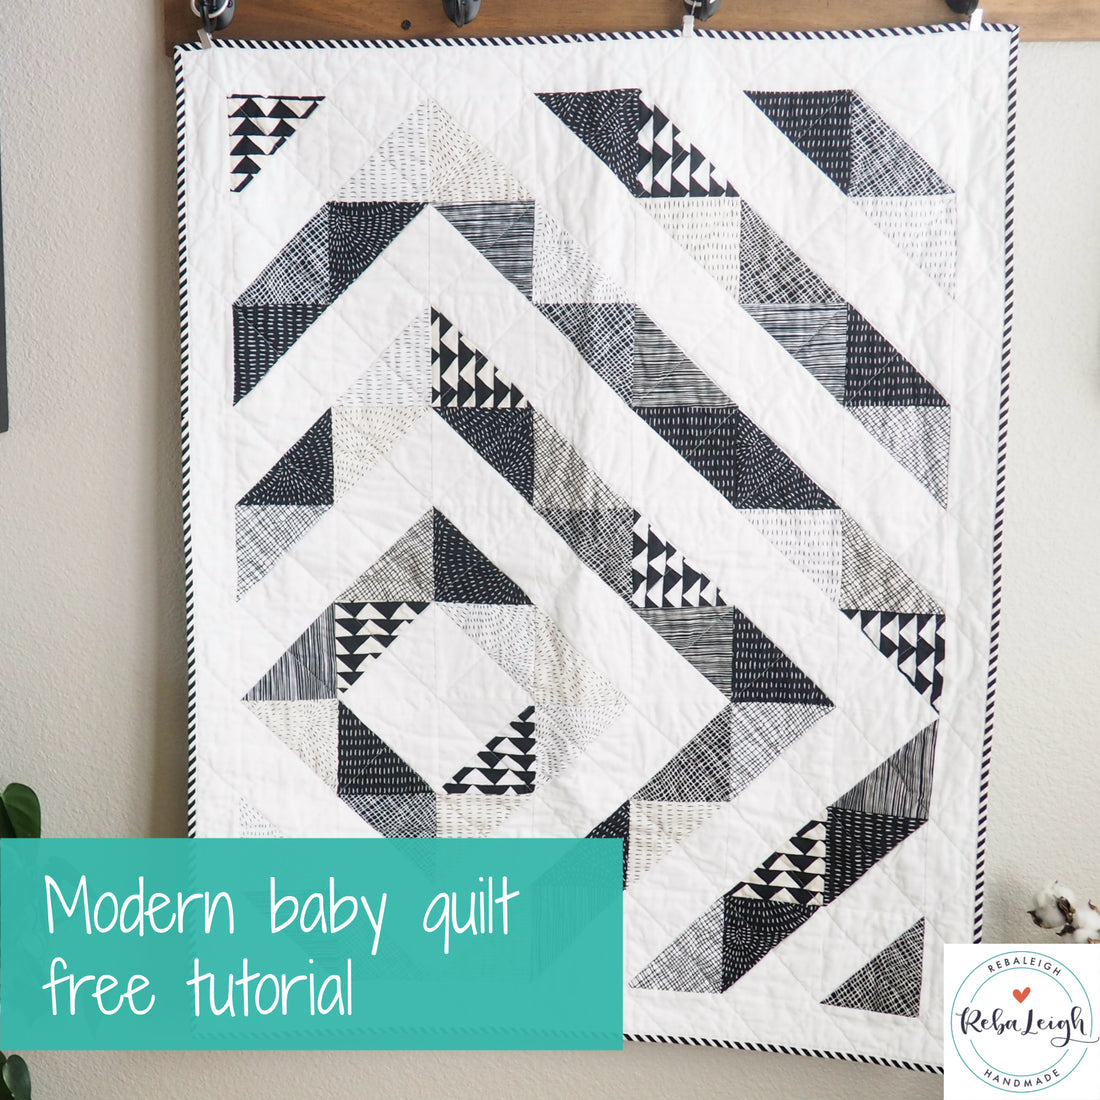 Modern half-square triangle baby quilt